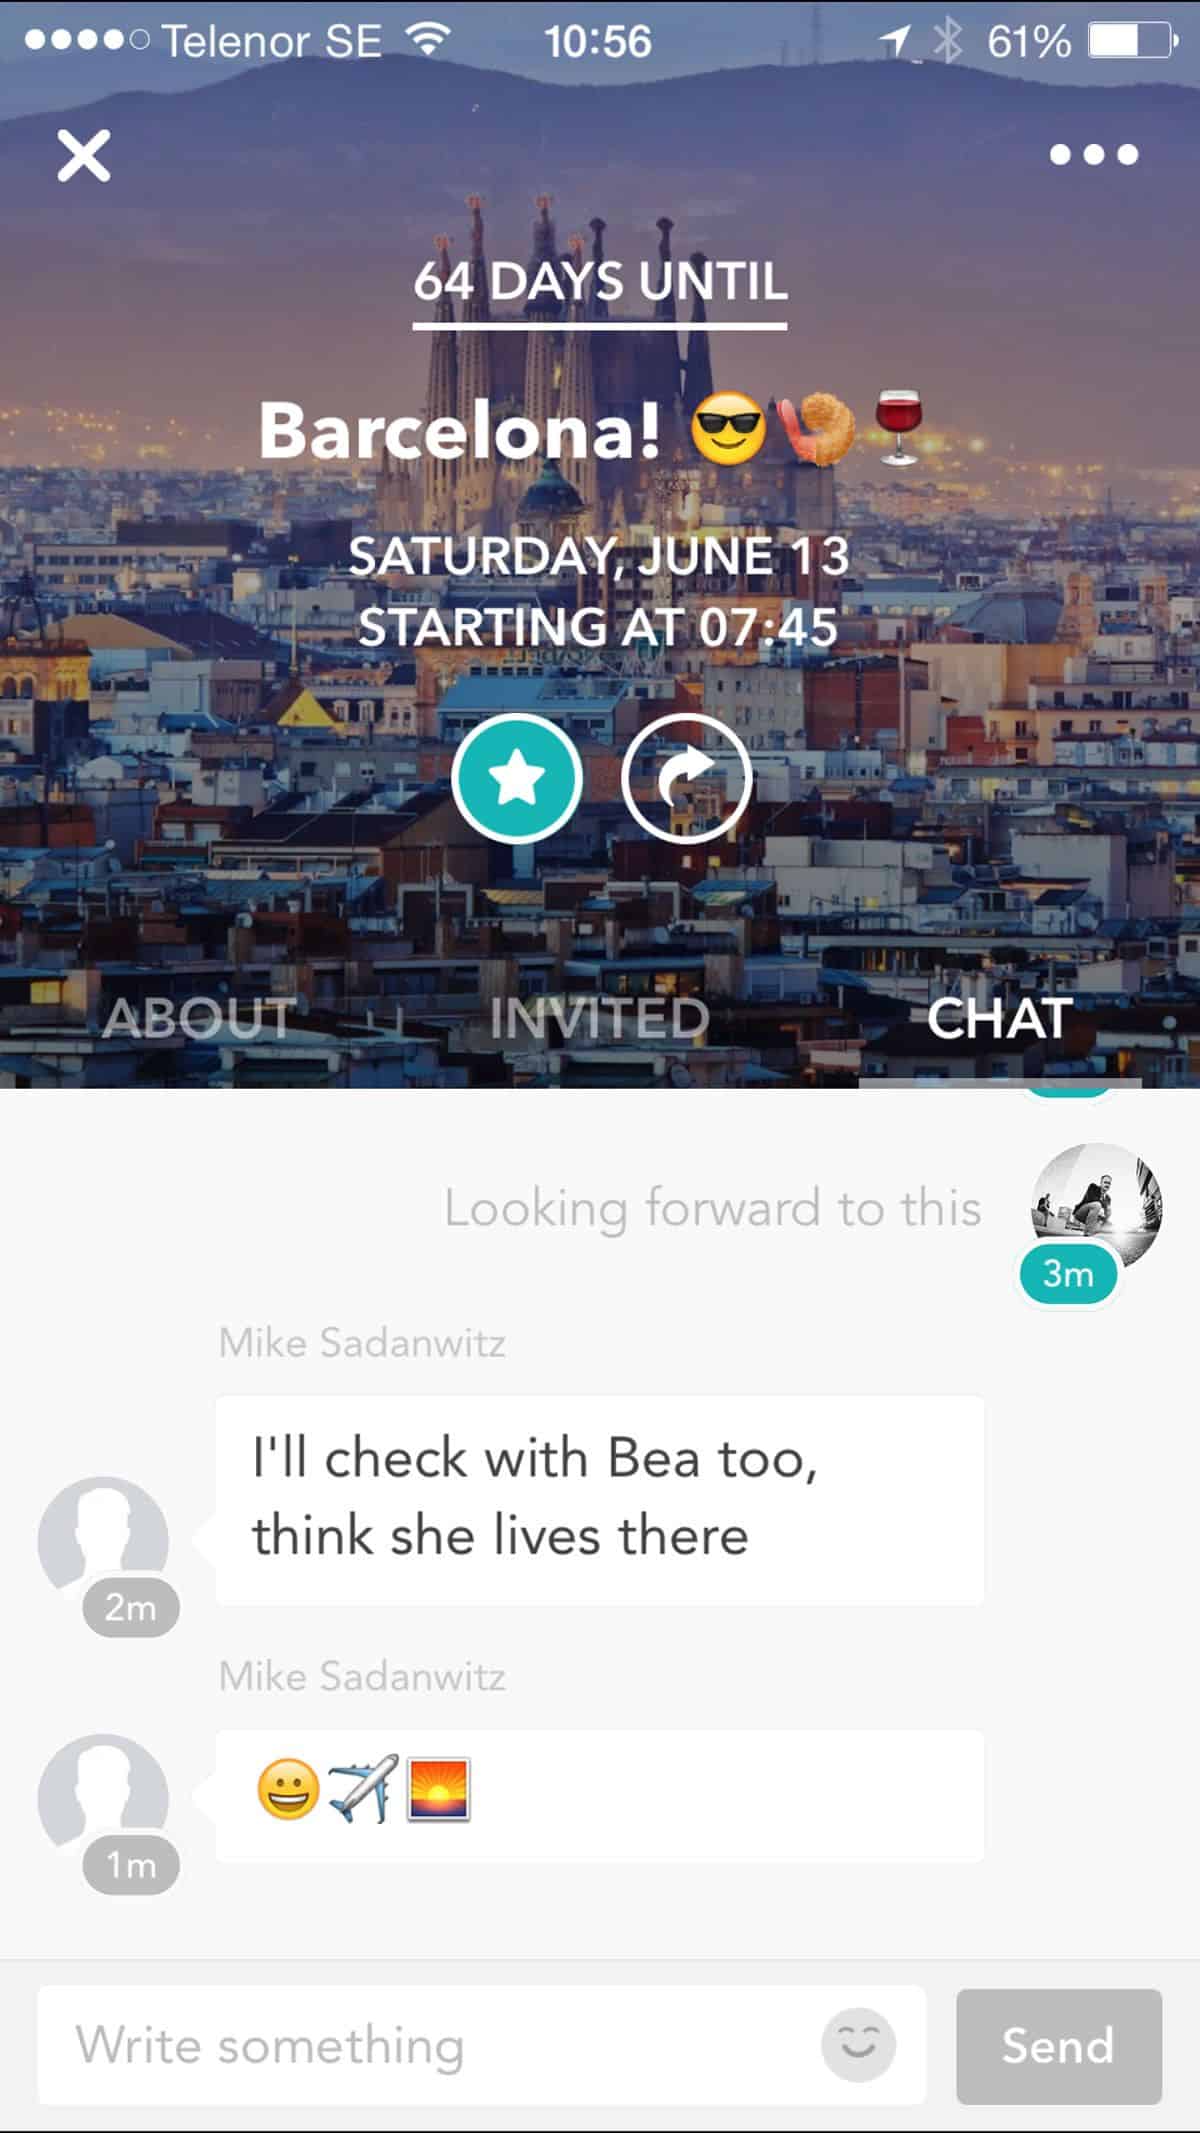 Raft social calendar app also integrates chat and does so with a sleek UI design